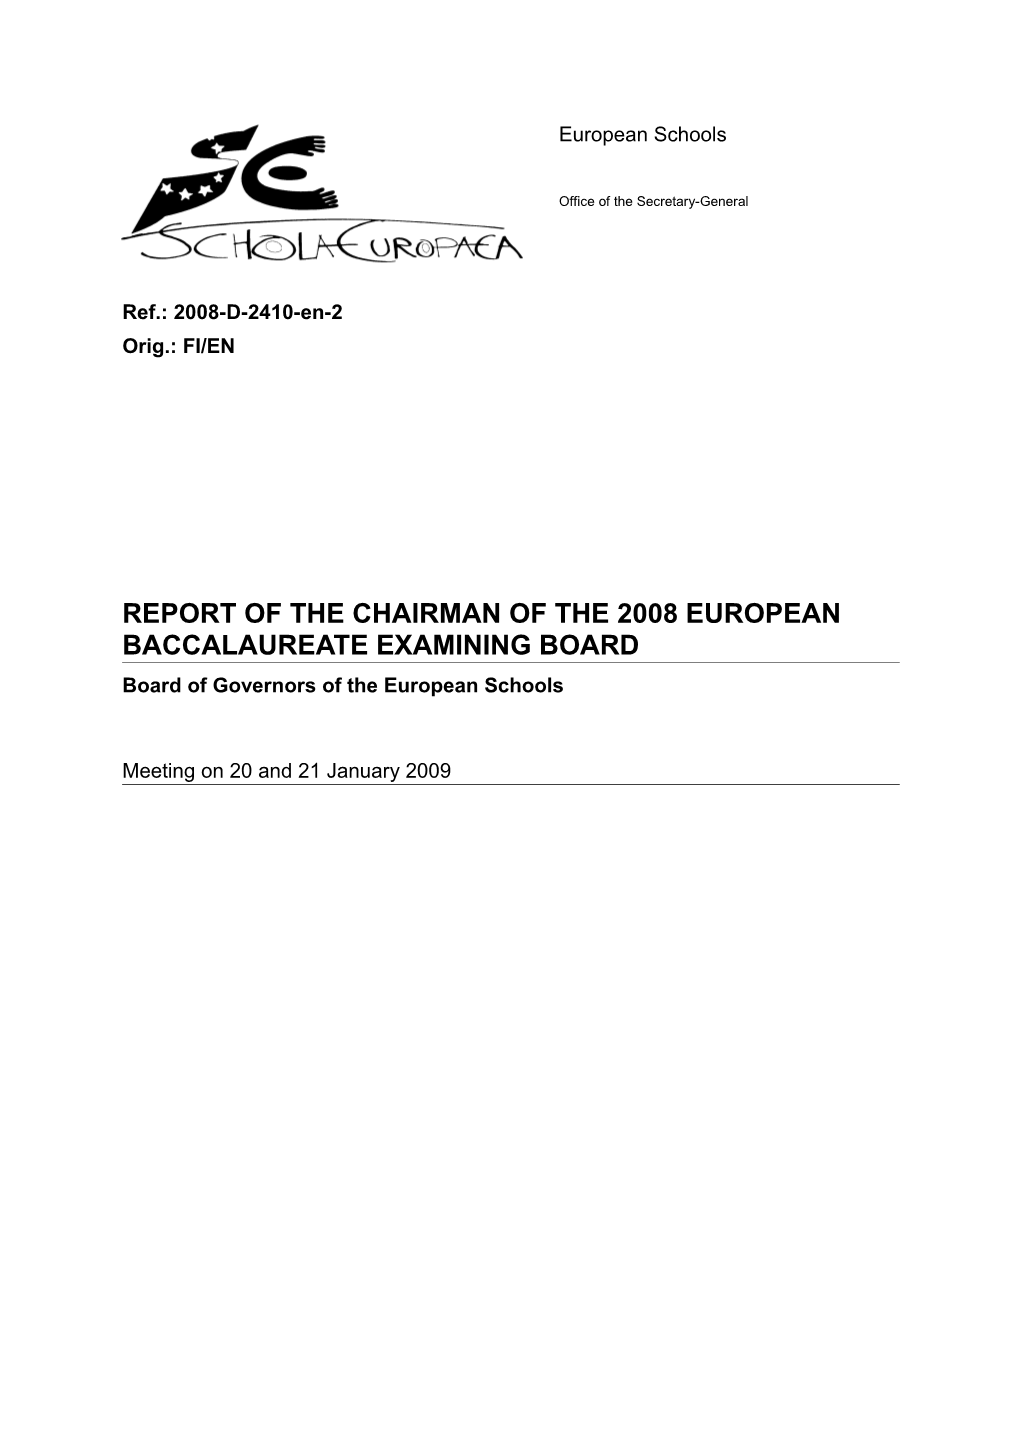 Report of the Chairman of the 2008 European Baccalaureate Examining Board